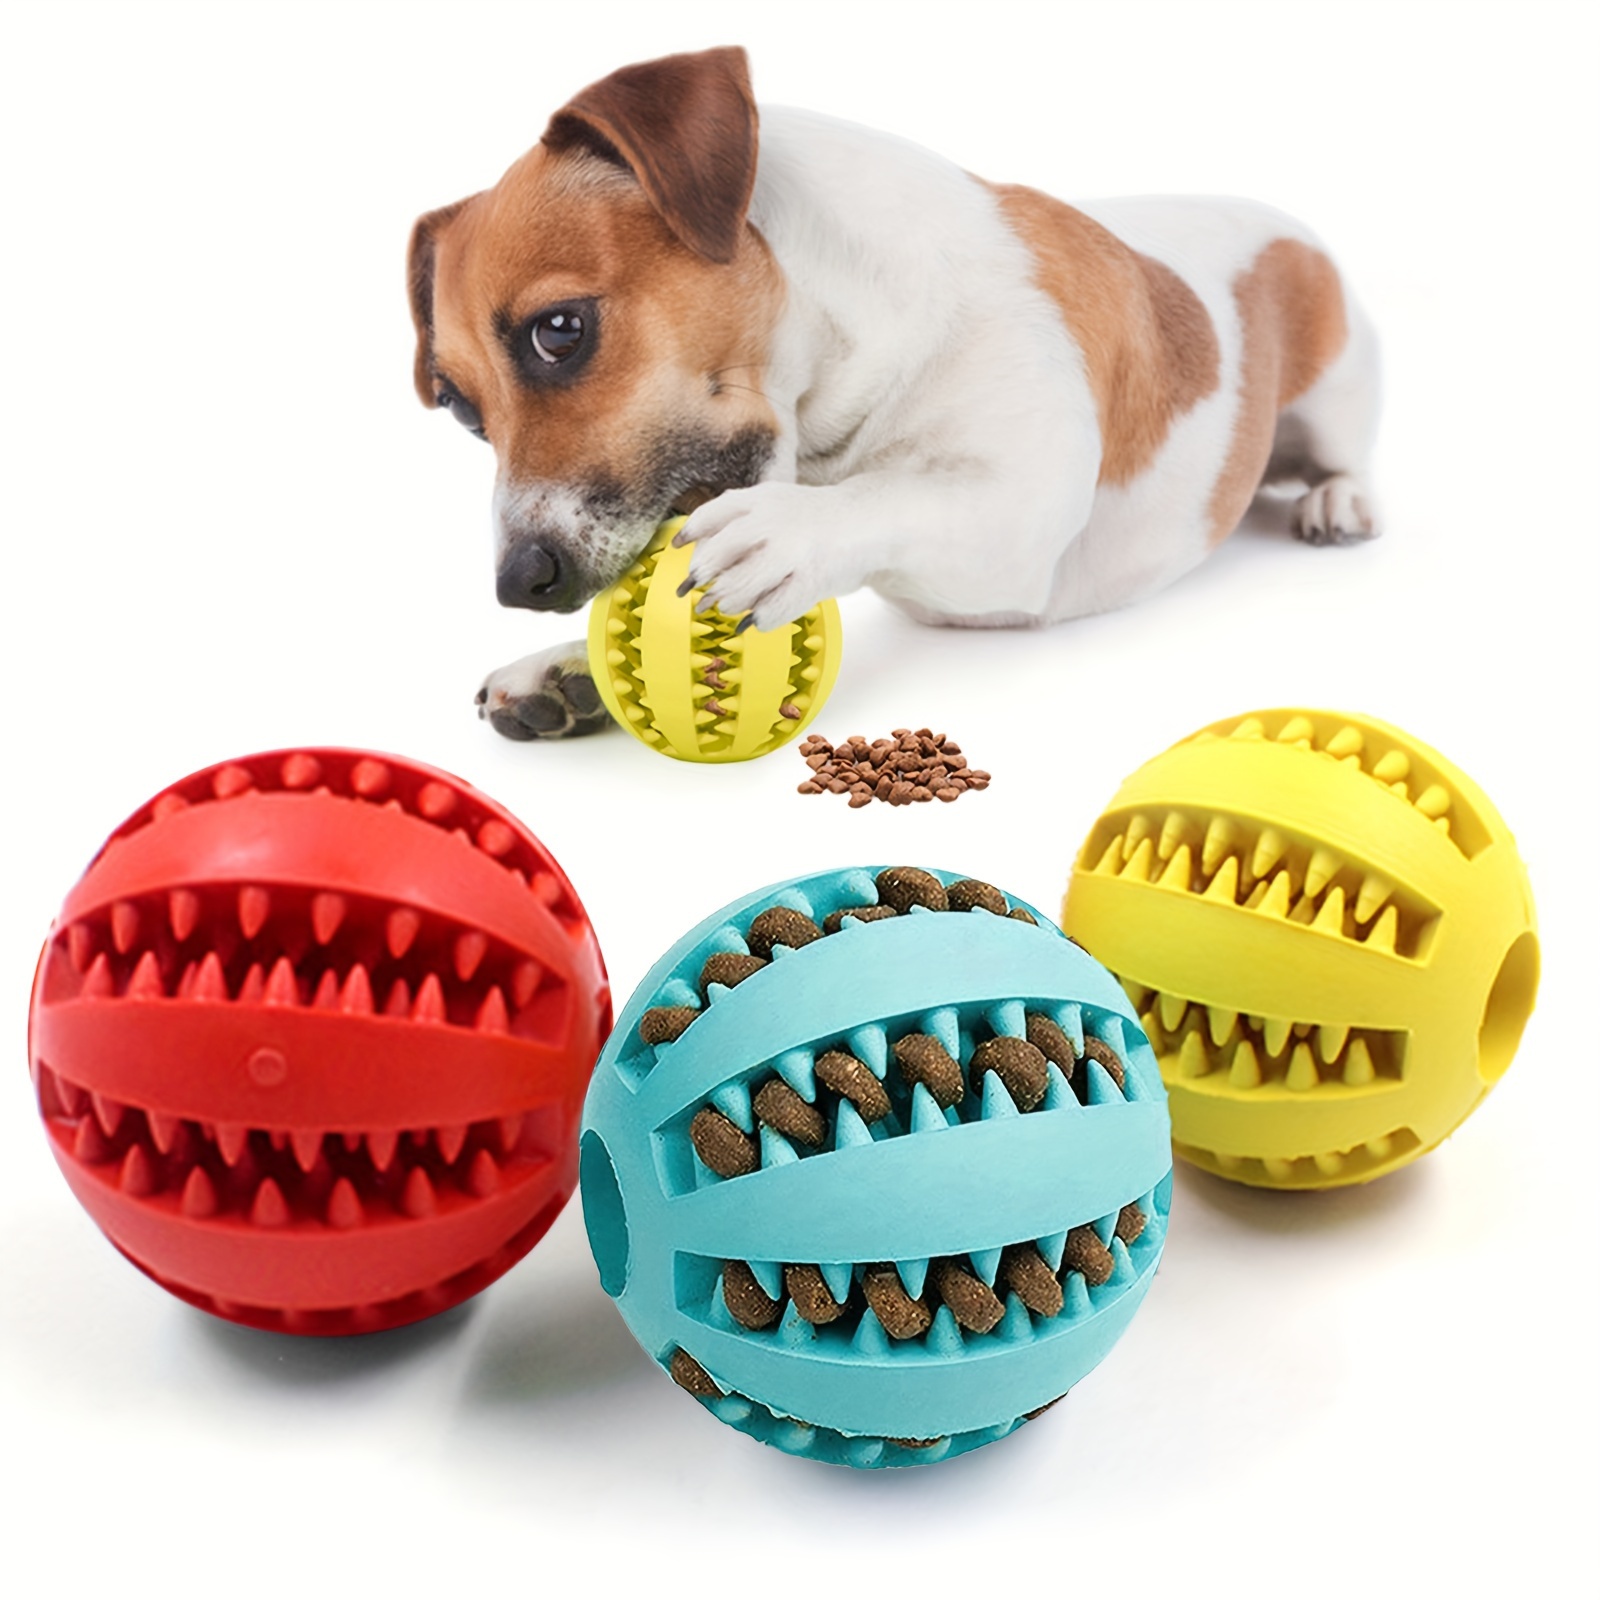 

3-pack Rubber Dog Treat Dispenser Balls - Solid Colors, Durable Interactive Food Puzzle Toy For All Breed Sizes, No Battery Needed